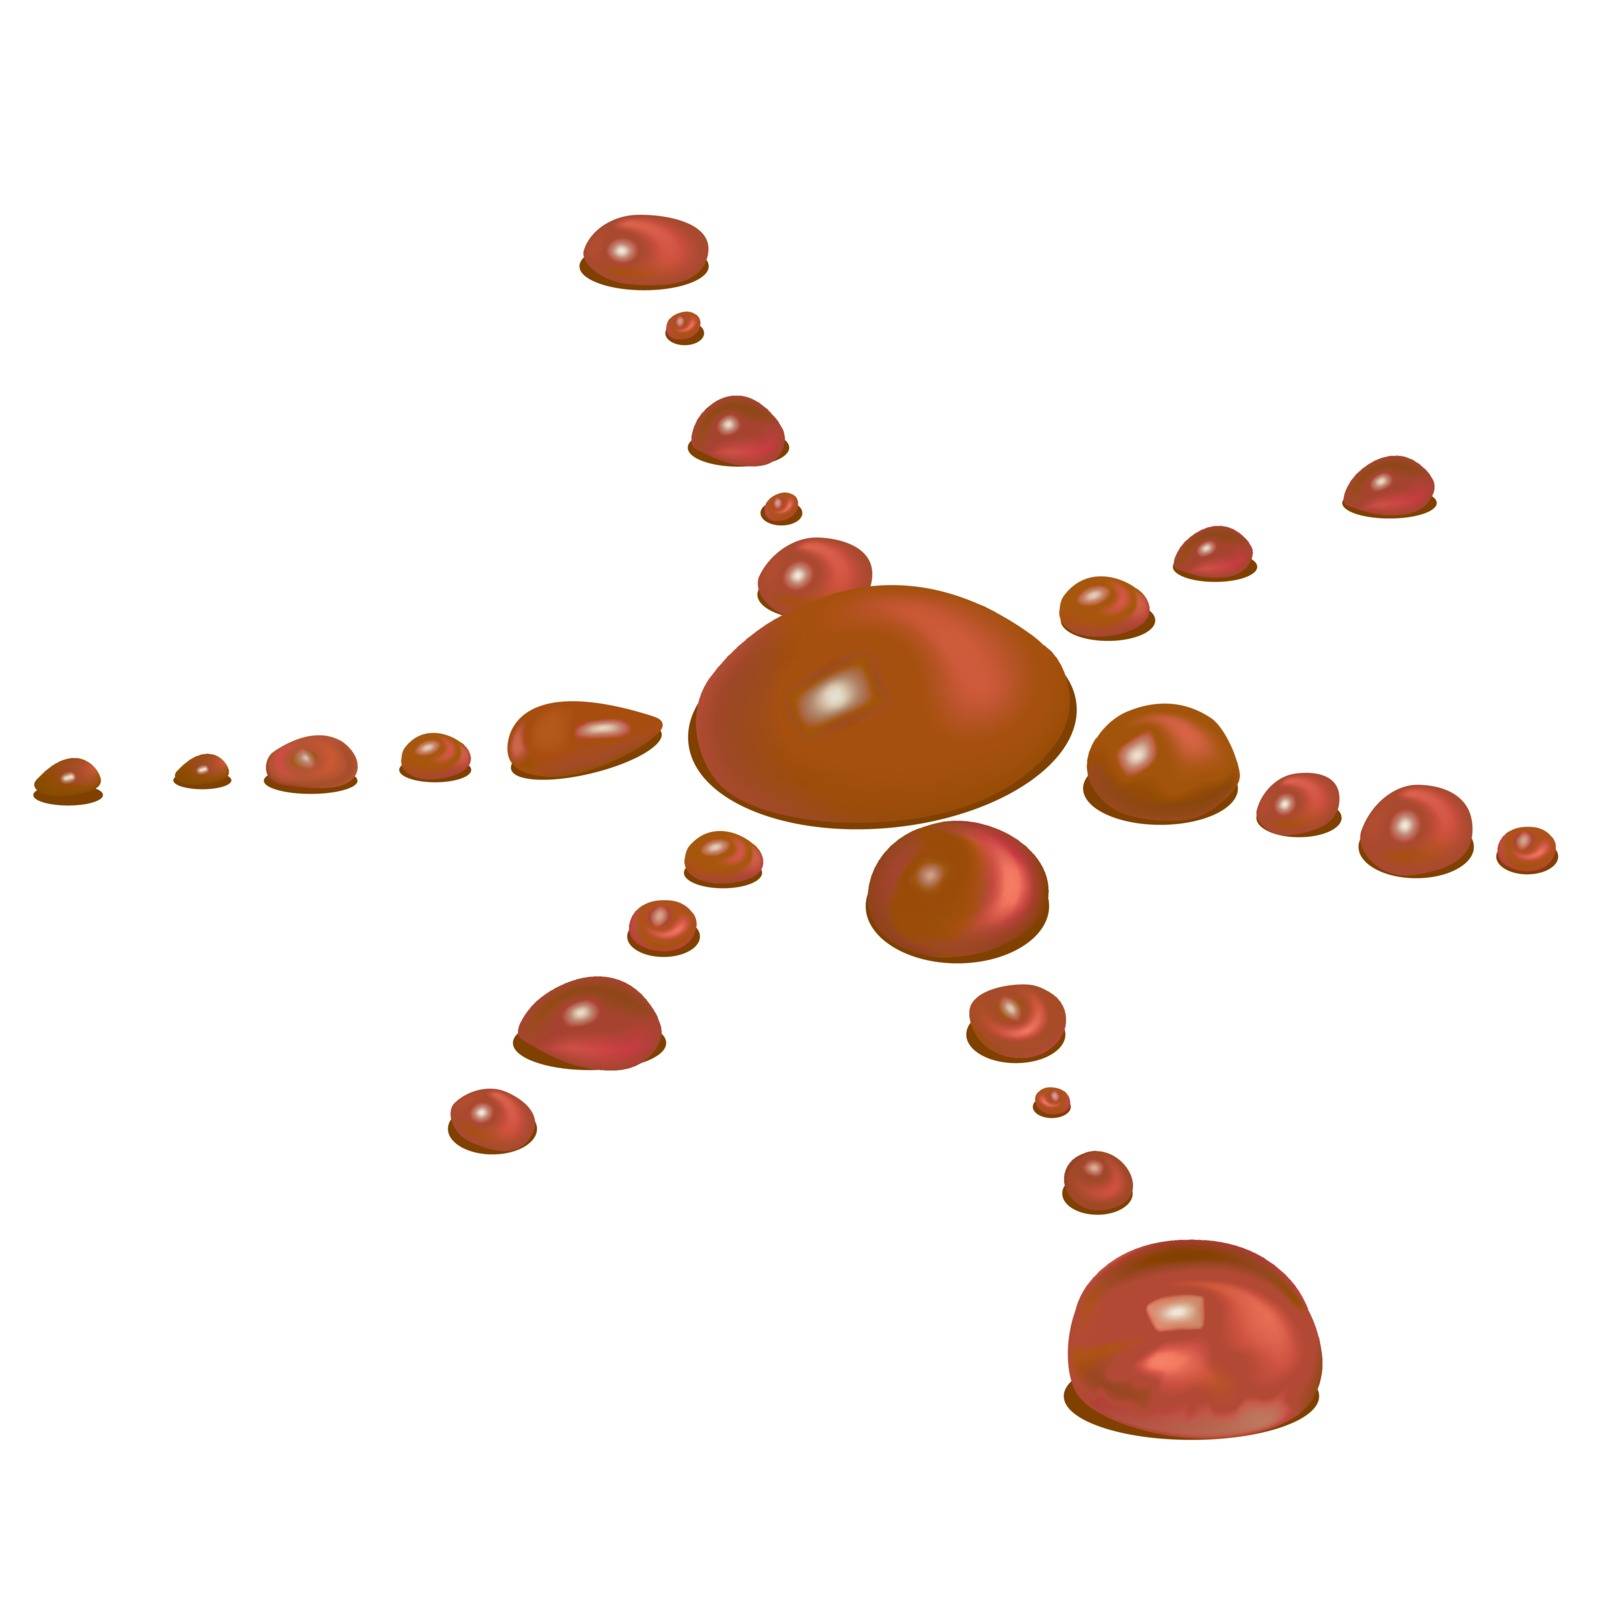 Blood Drops - Colored Illustration, Vector